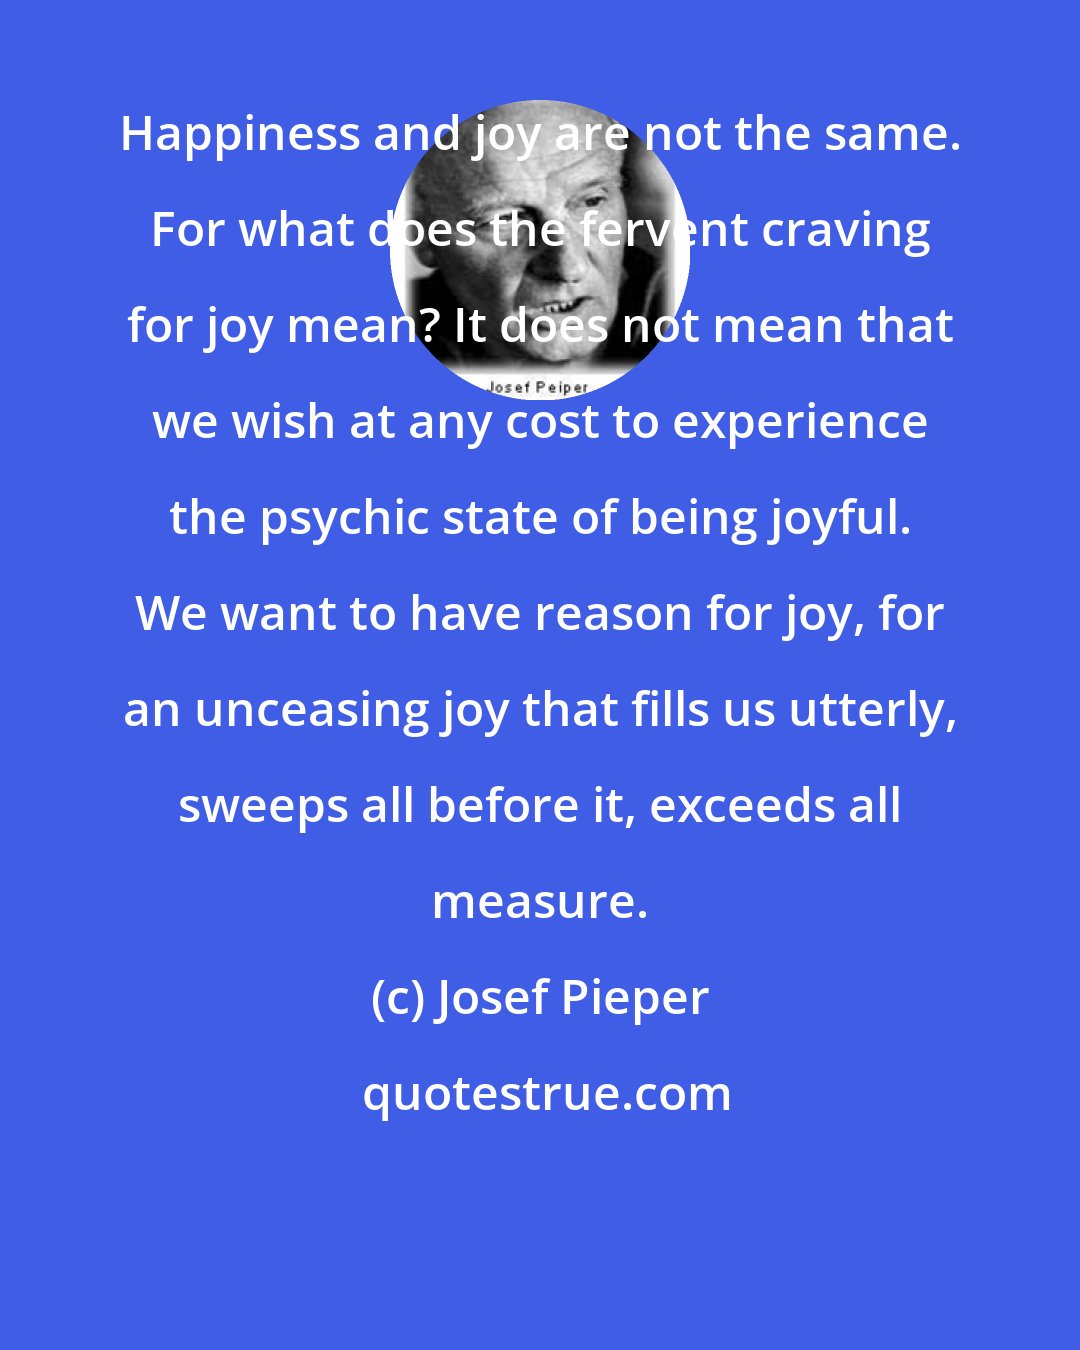 Josef Pieper: Happiness and joy are not the same. For what does the fervent craving for joy mean? It does not mean that we wish at any cost to experience the psychic state of being joyful. We want to have reason for joy, for an unceasing joy that fills us utterly, sweeps all before it, exceeds all measure.